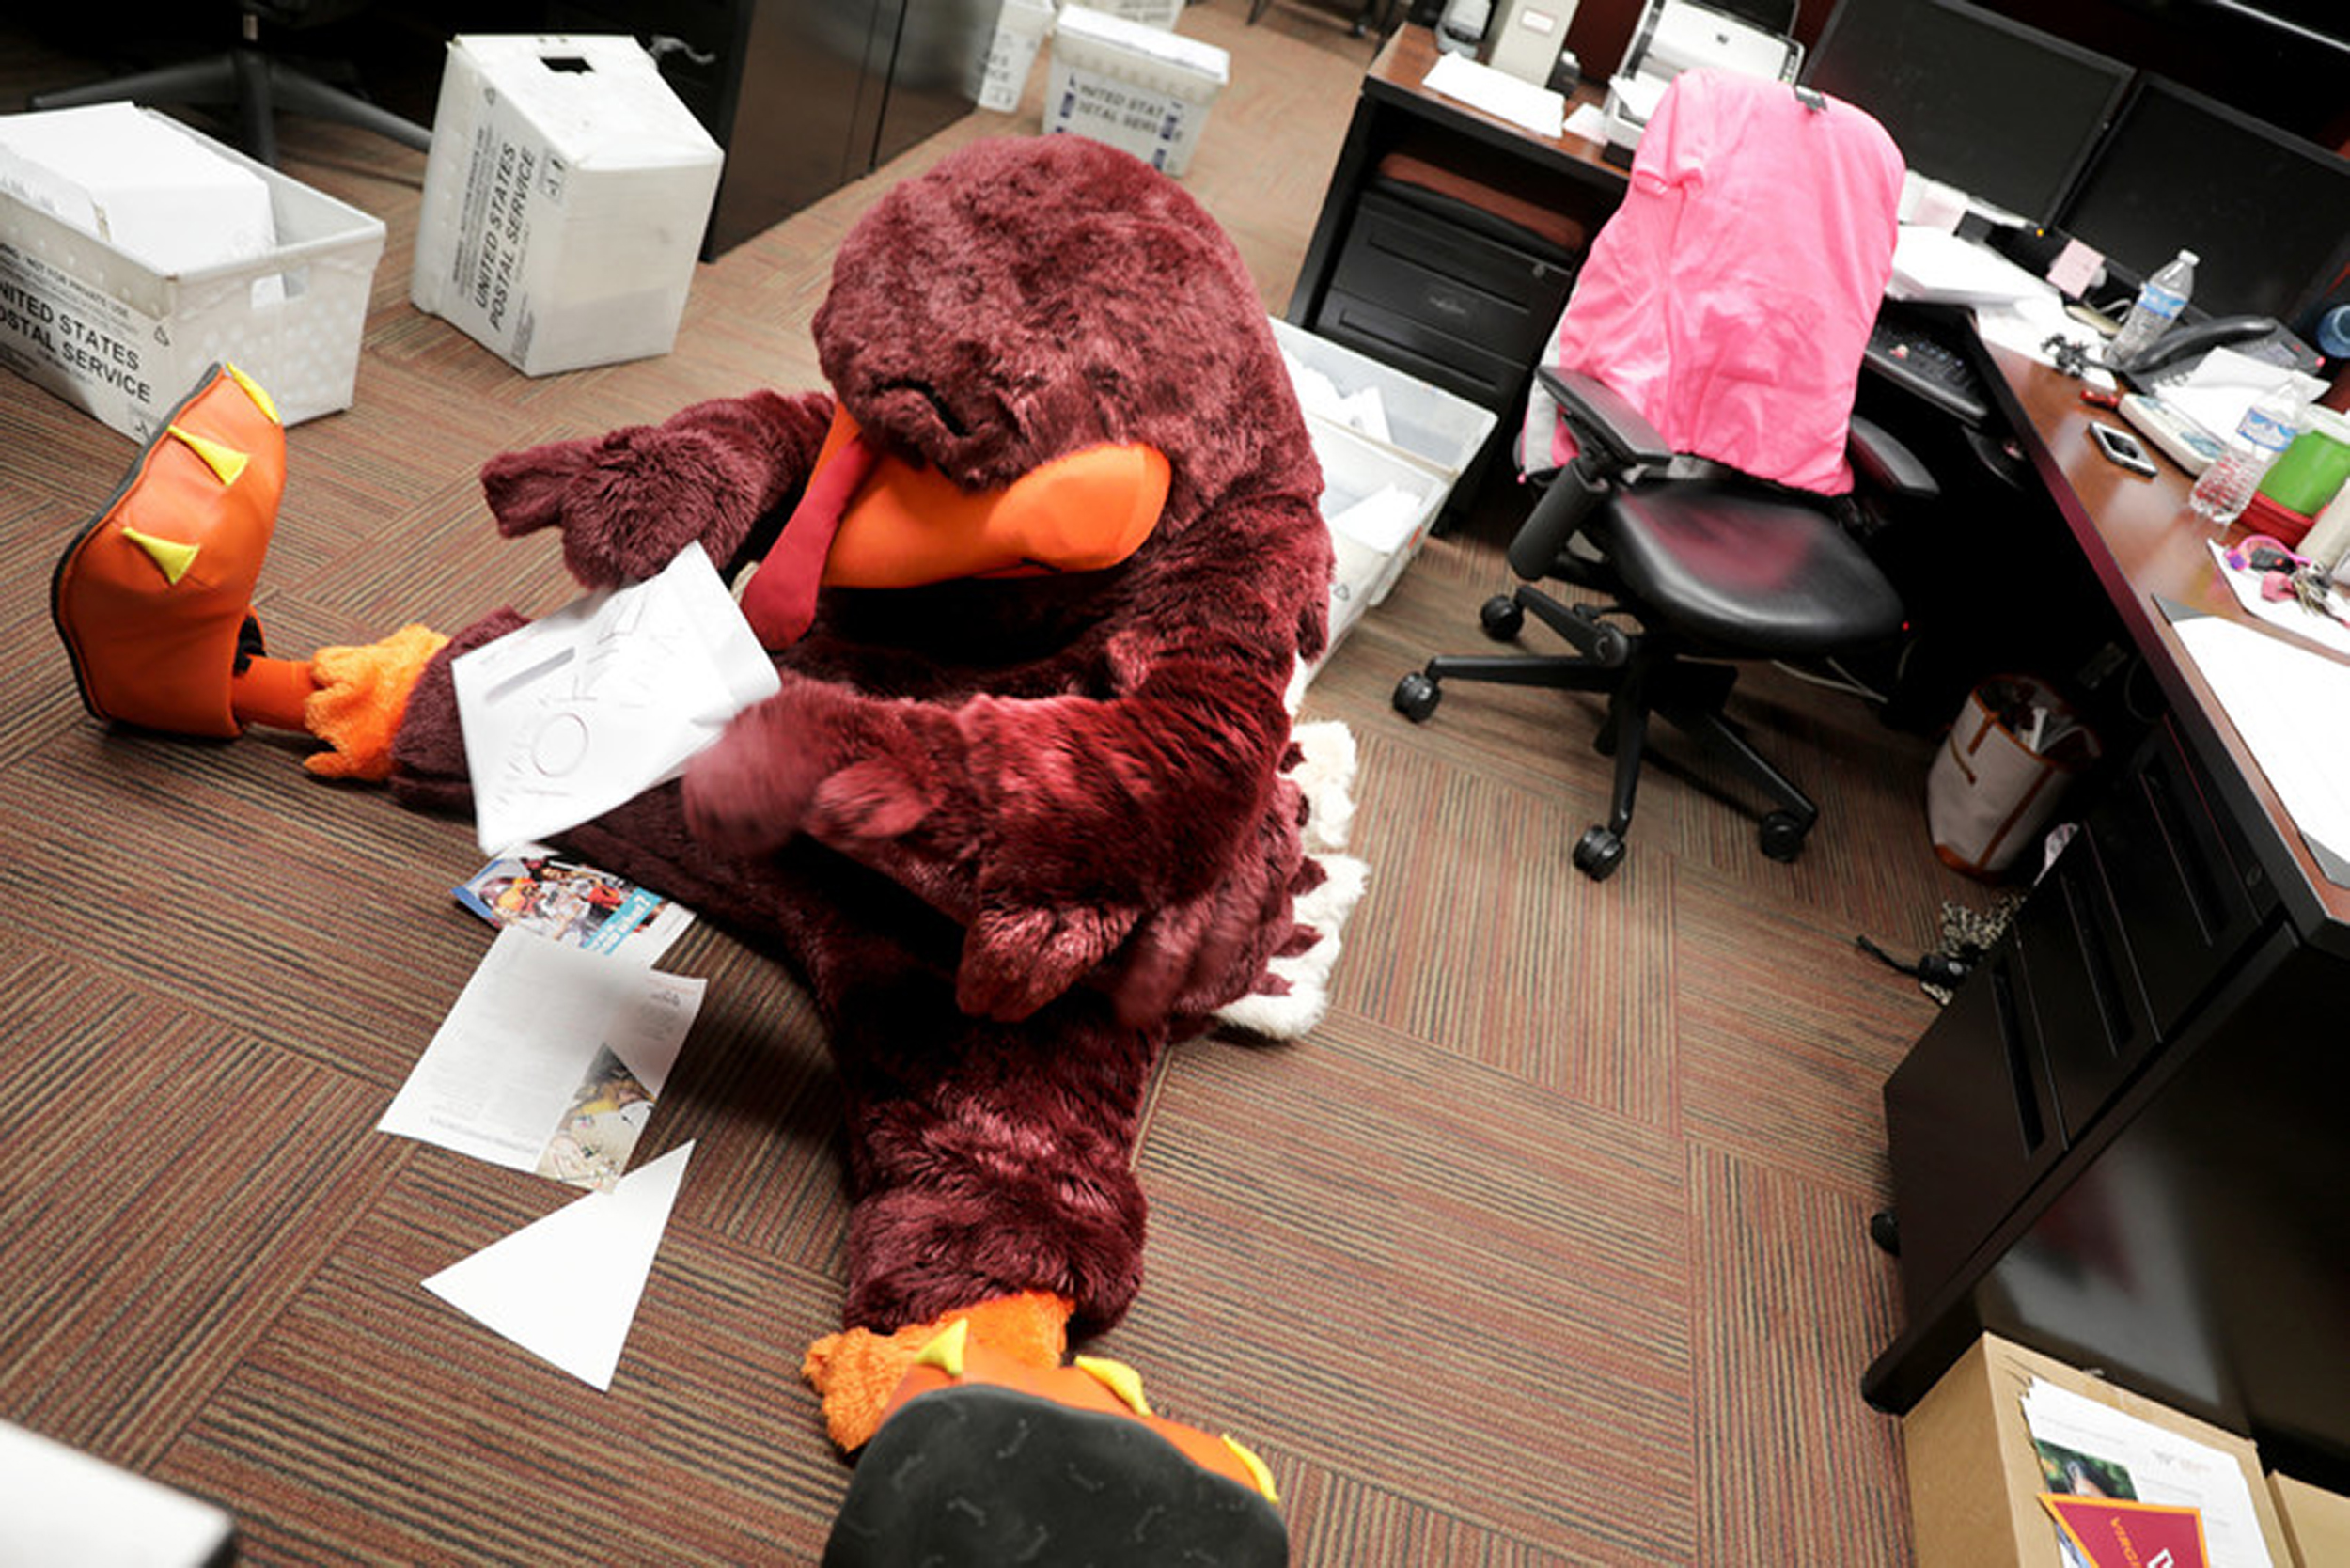 Hokie Bird in the admissions office